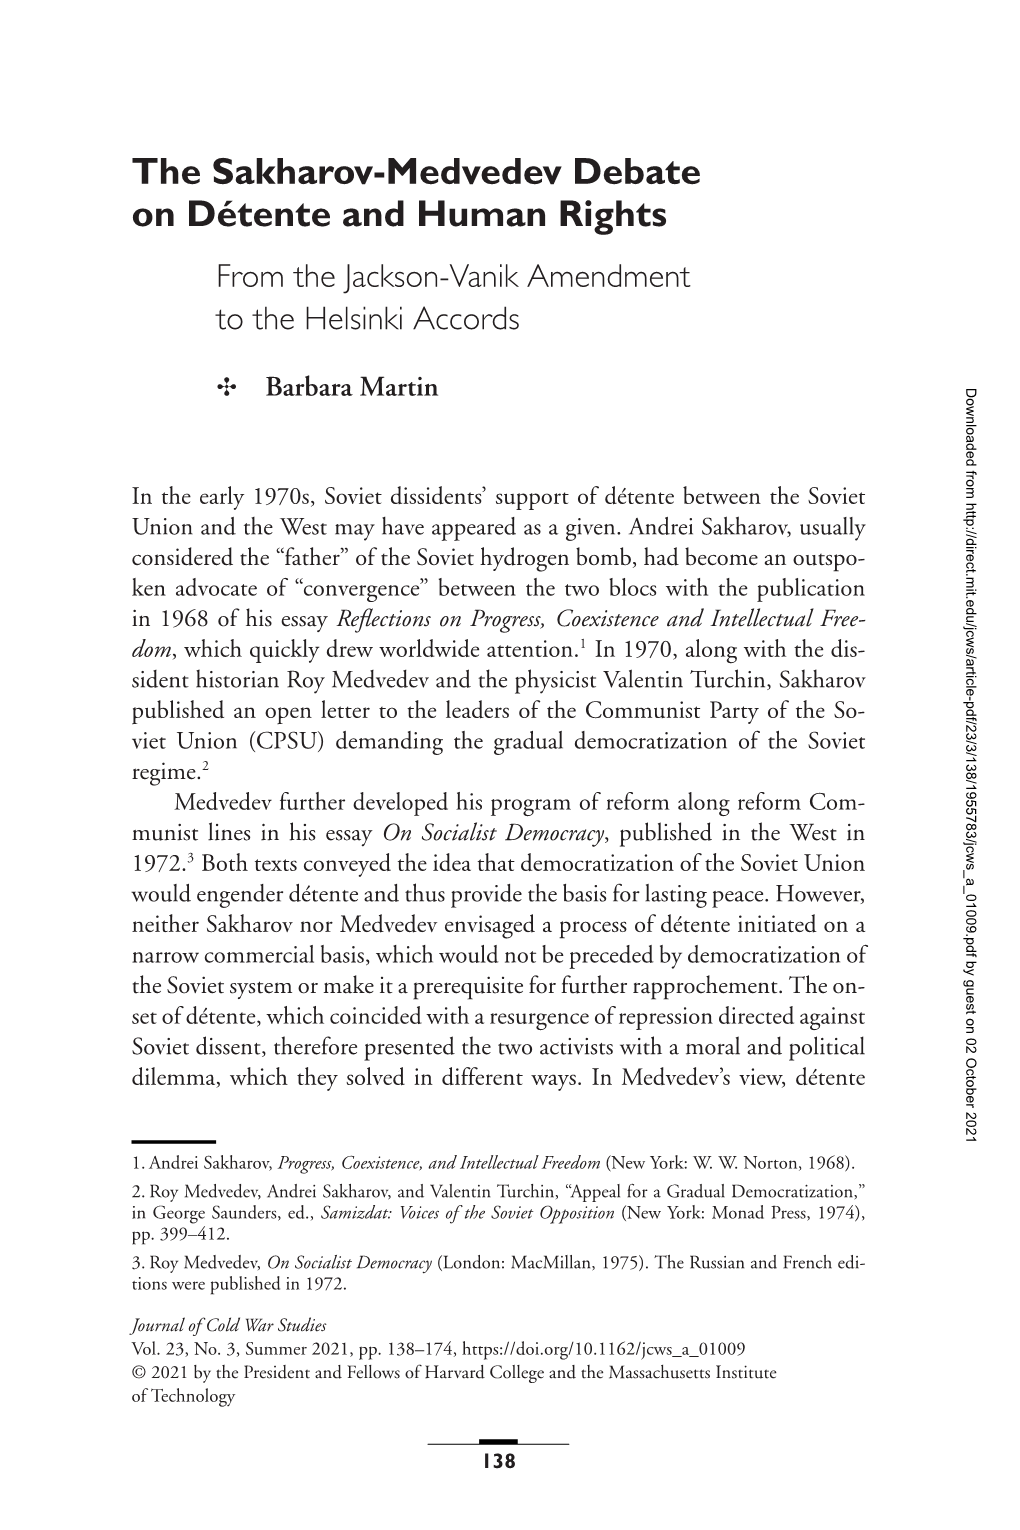 The Sakharov-Medvedev Debate on Détente and Human Rights from the Jackson-Vanik Amendment to the Helsinki Accords